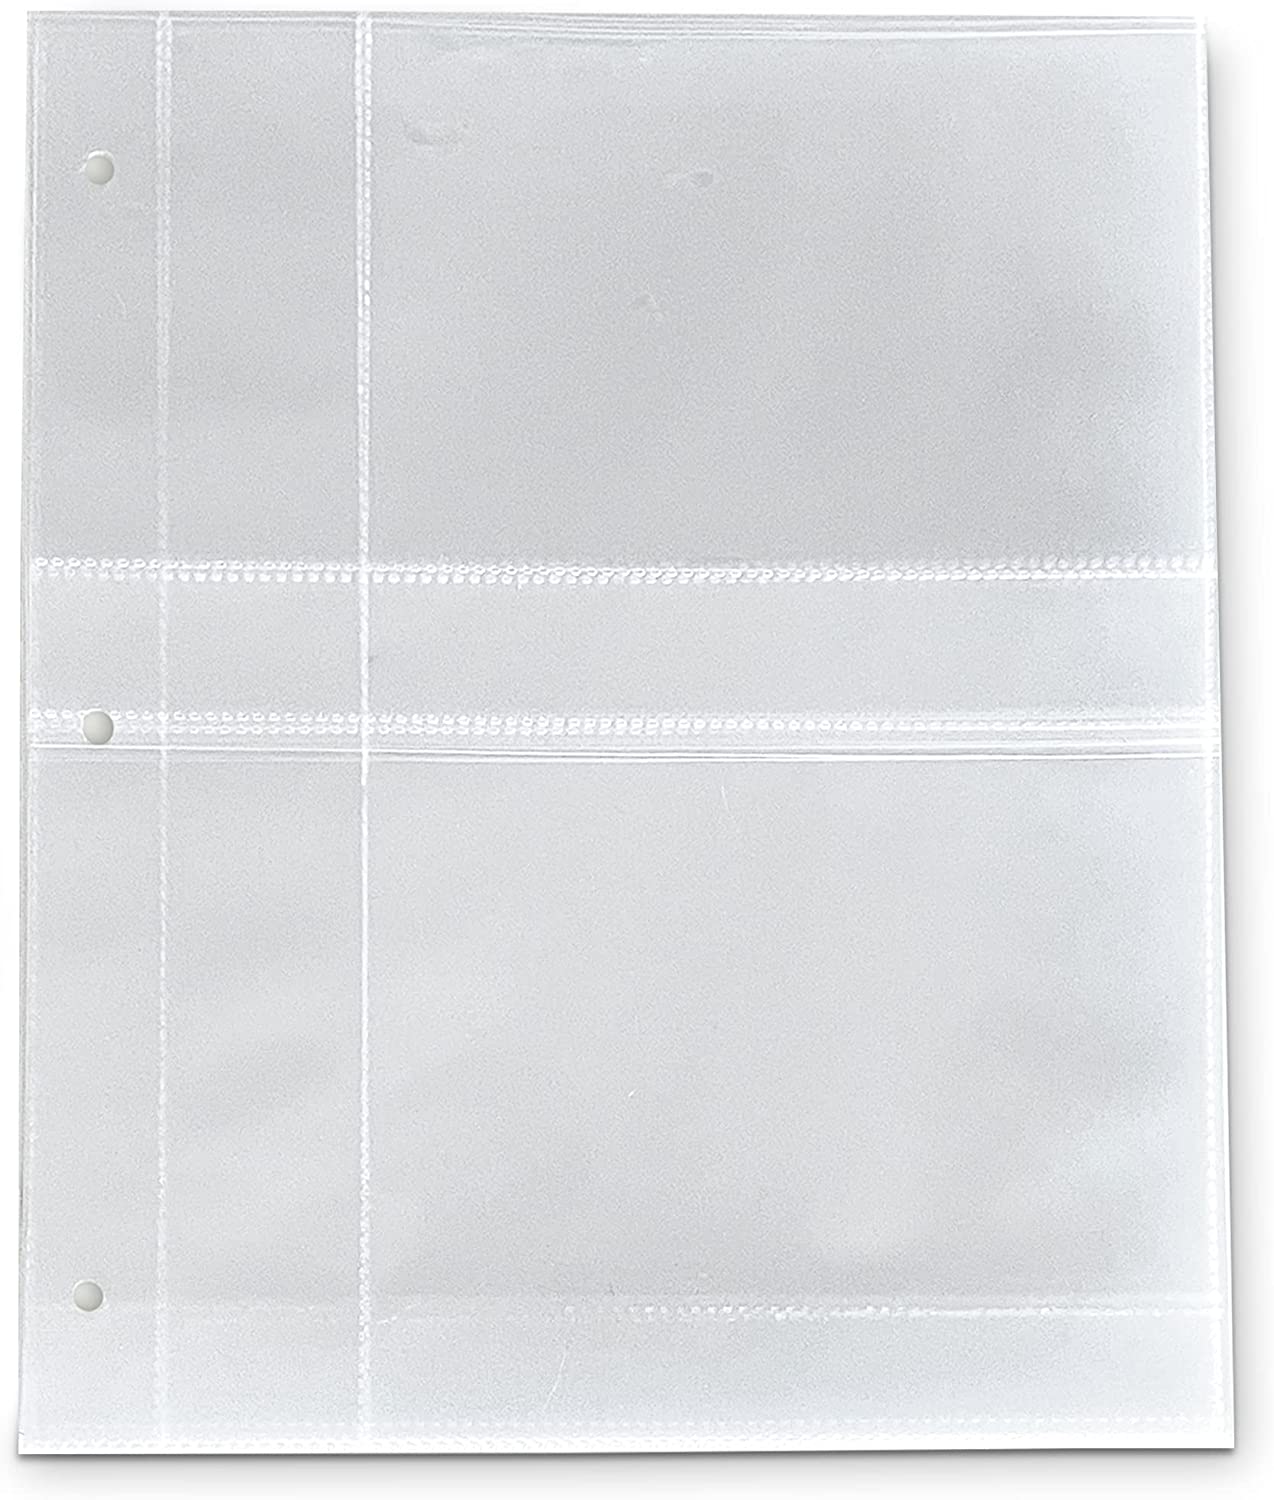 Recipe Card Plastic Sleeve Protector Pages for 3 ring binders from  Meadowsweet Kitchens 